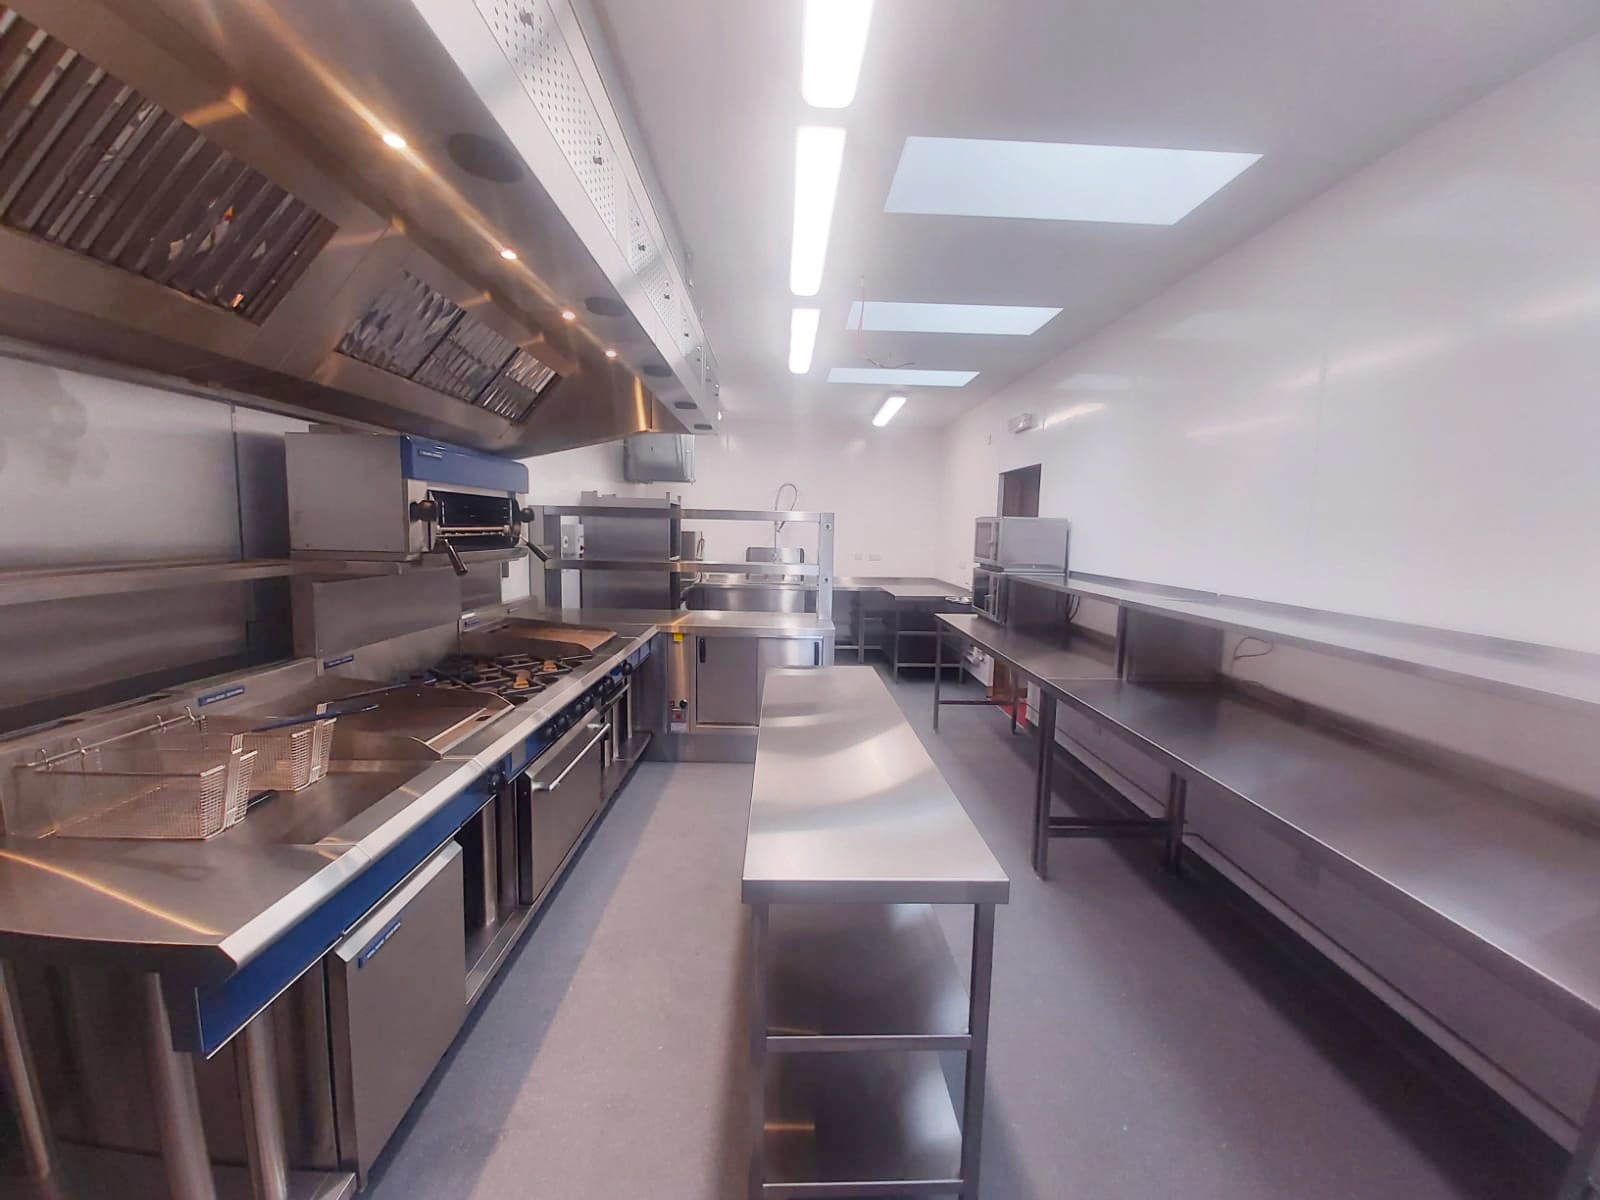 Main image for Inspire Commercial Kitchen Solutions Ltd